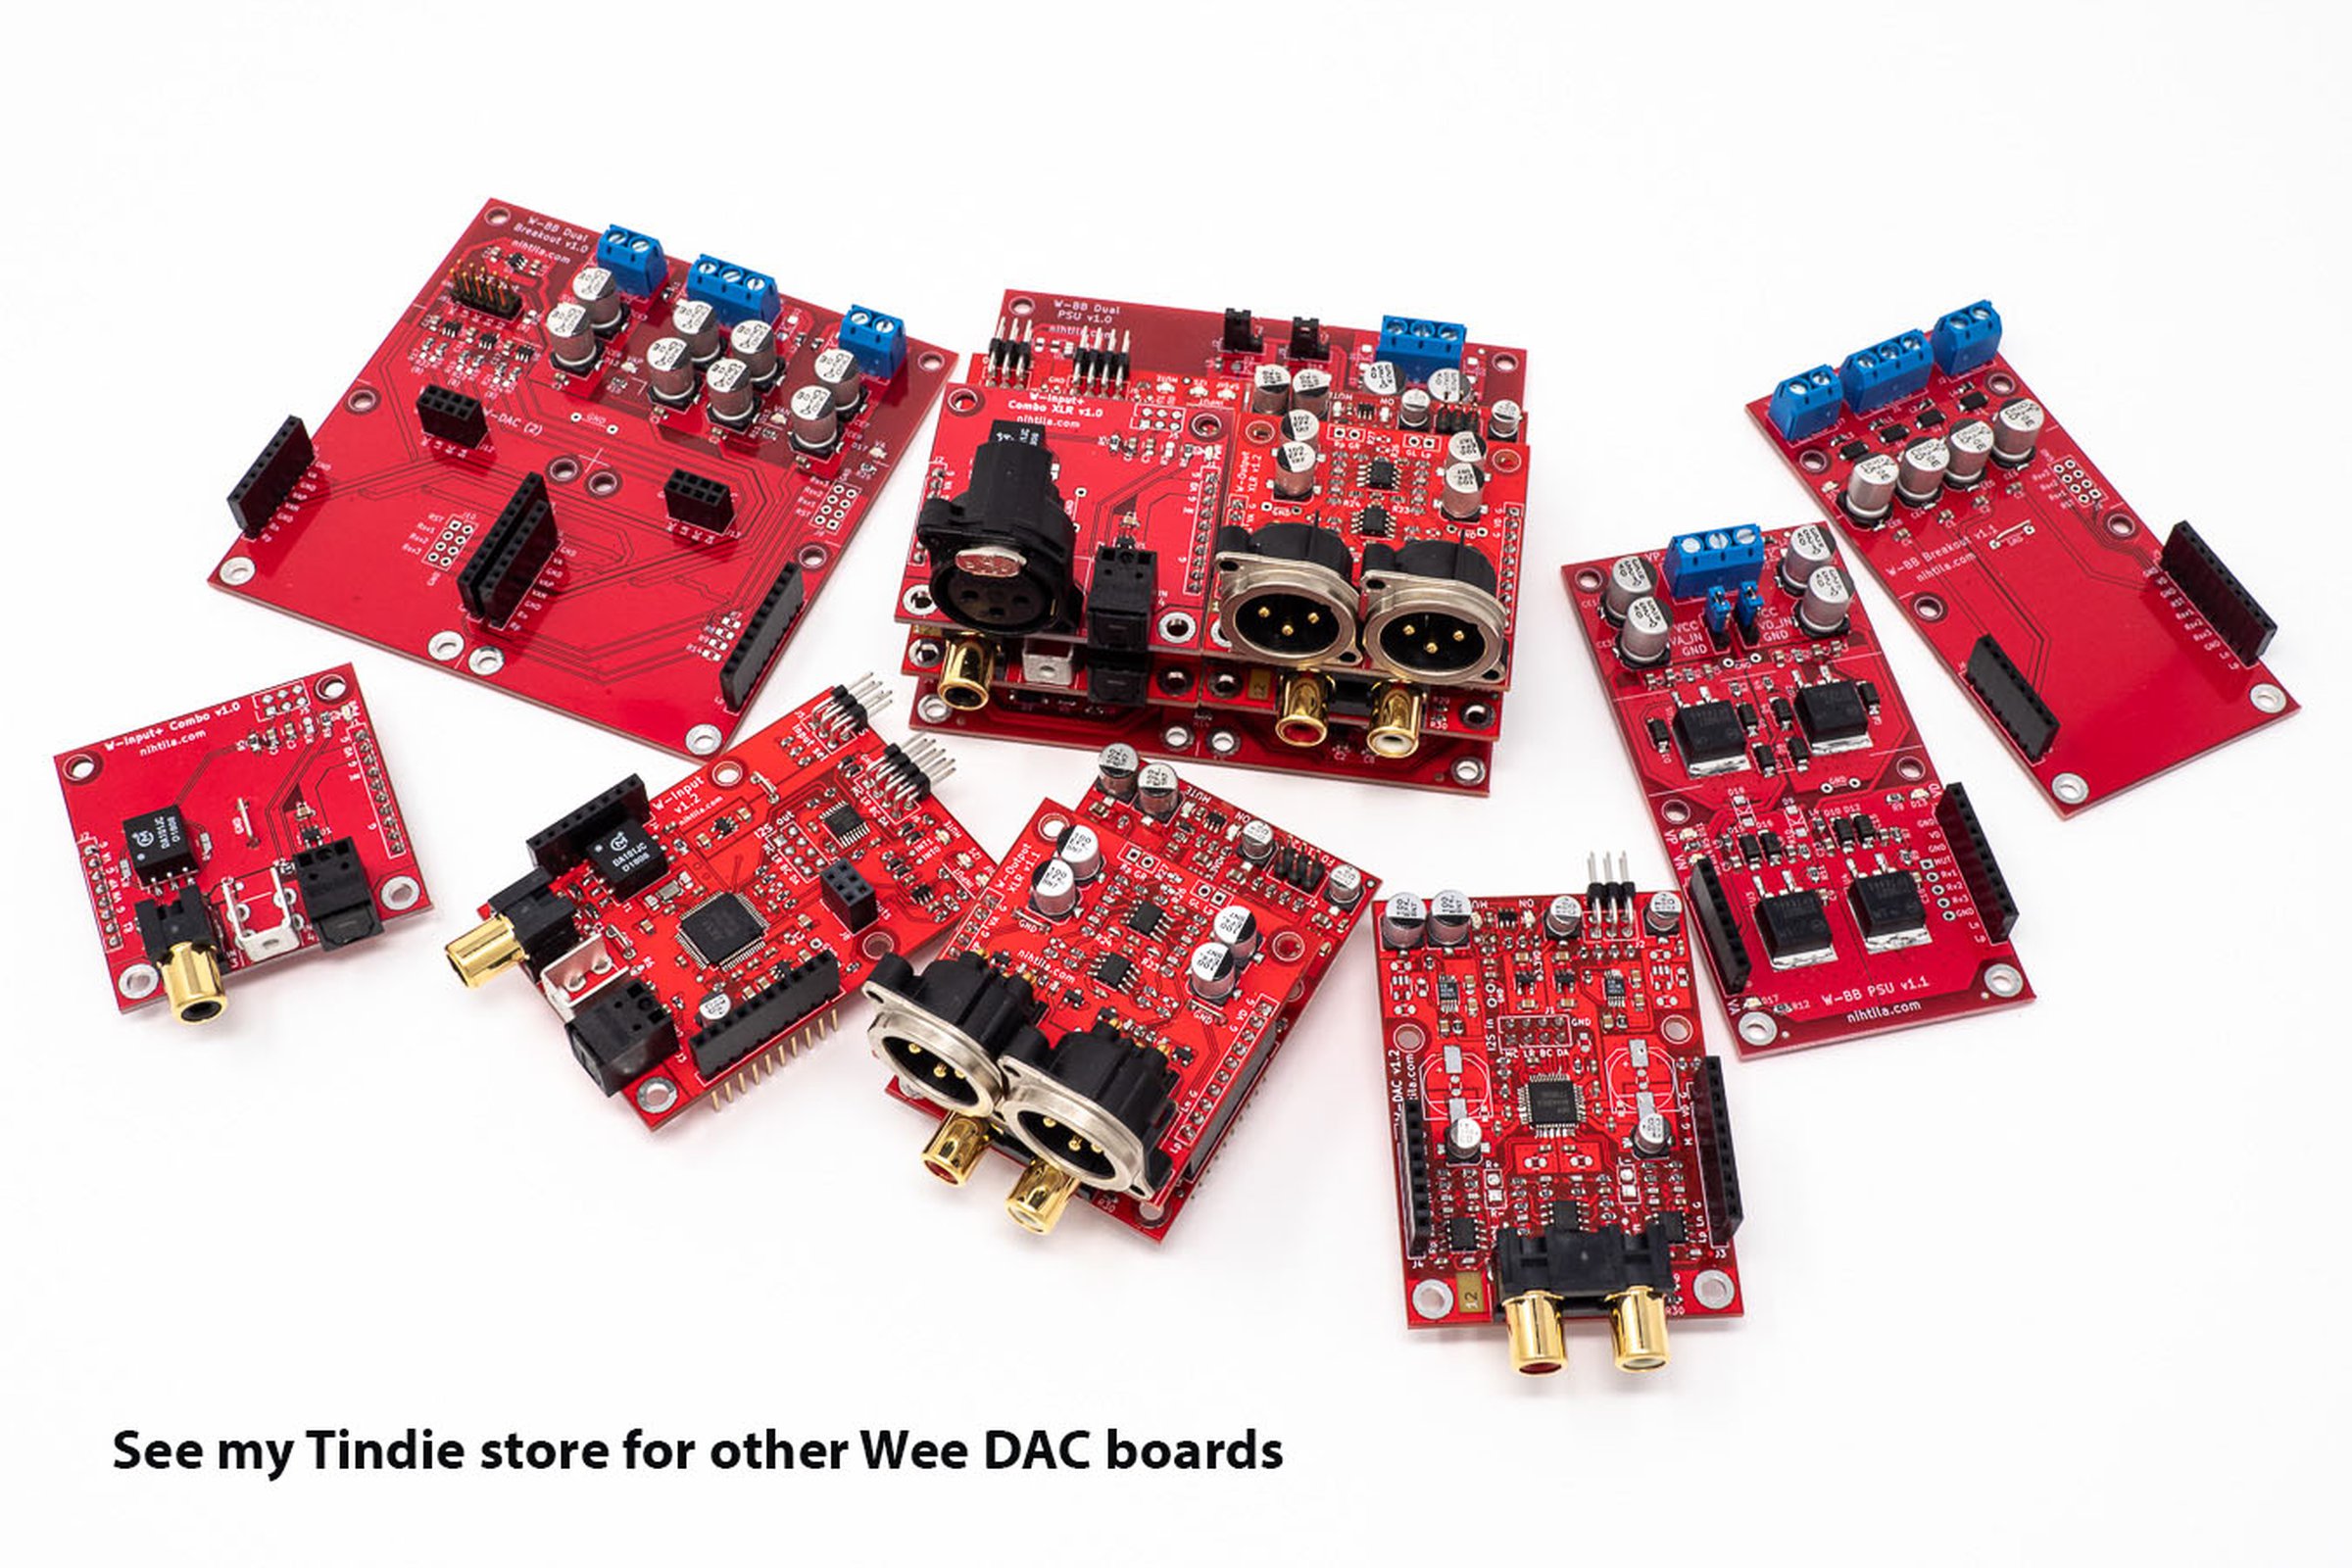 Wee DAC boards